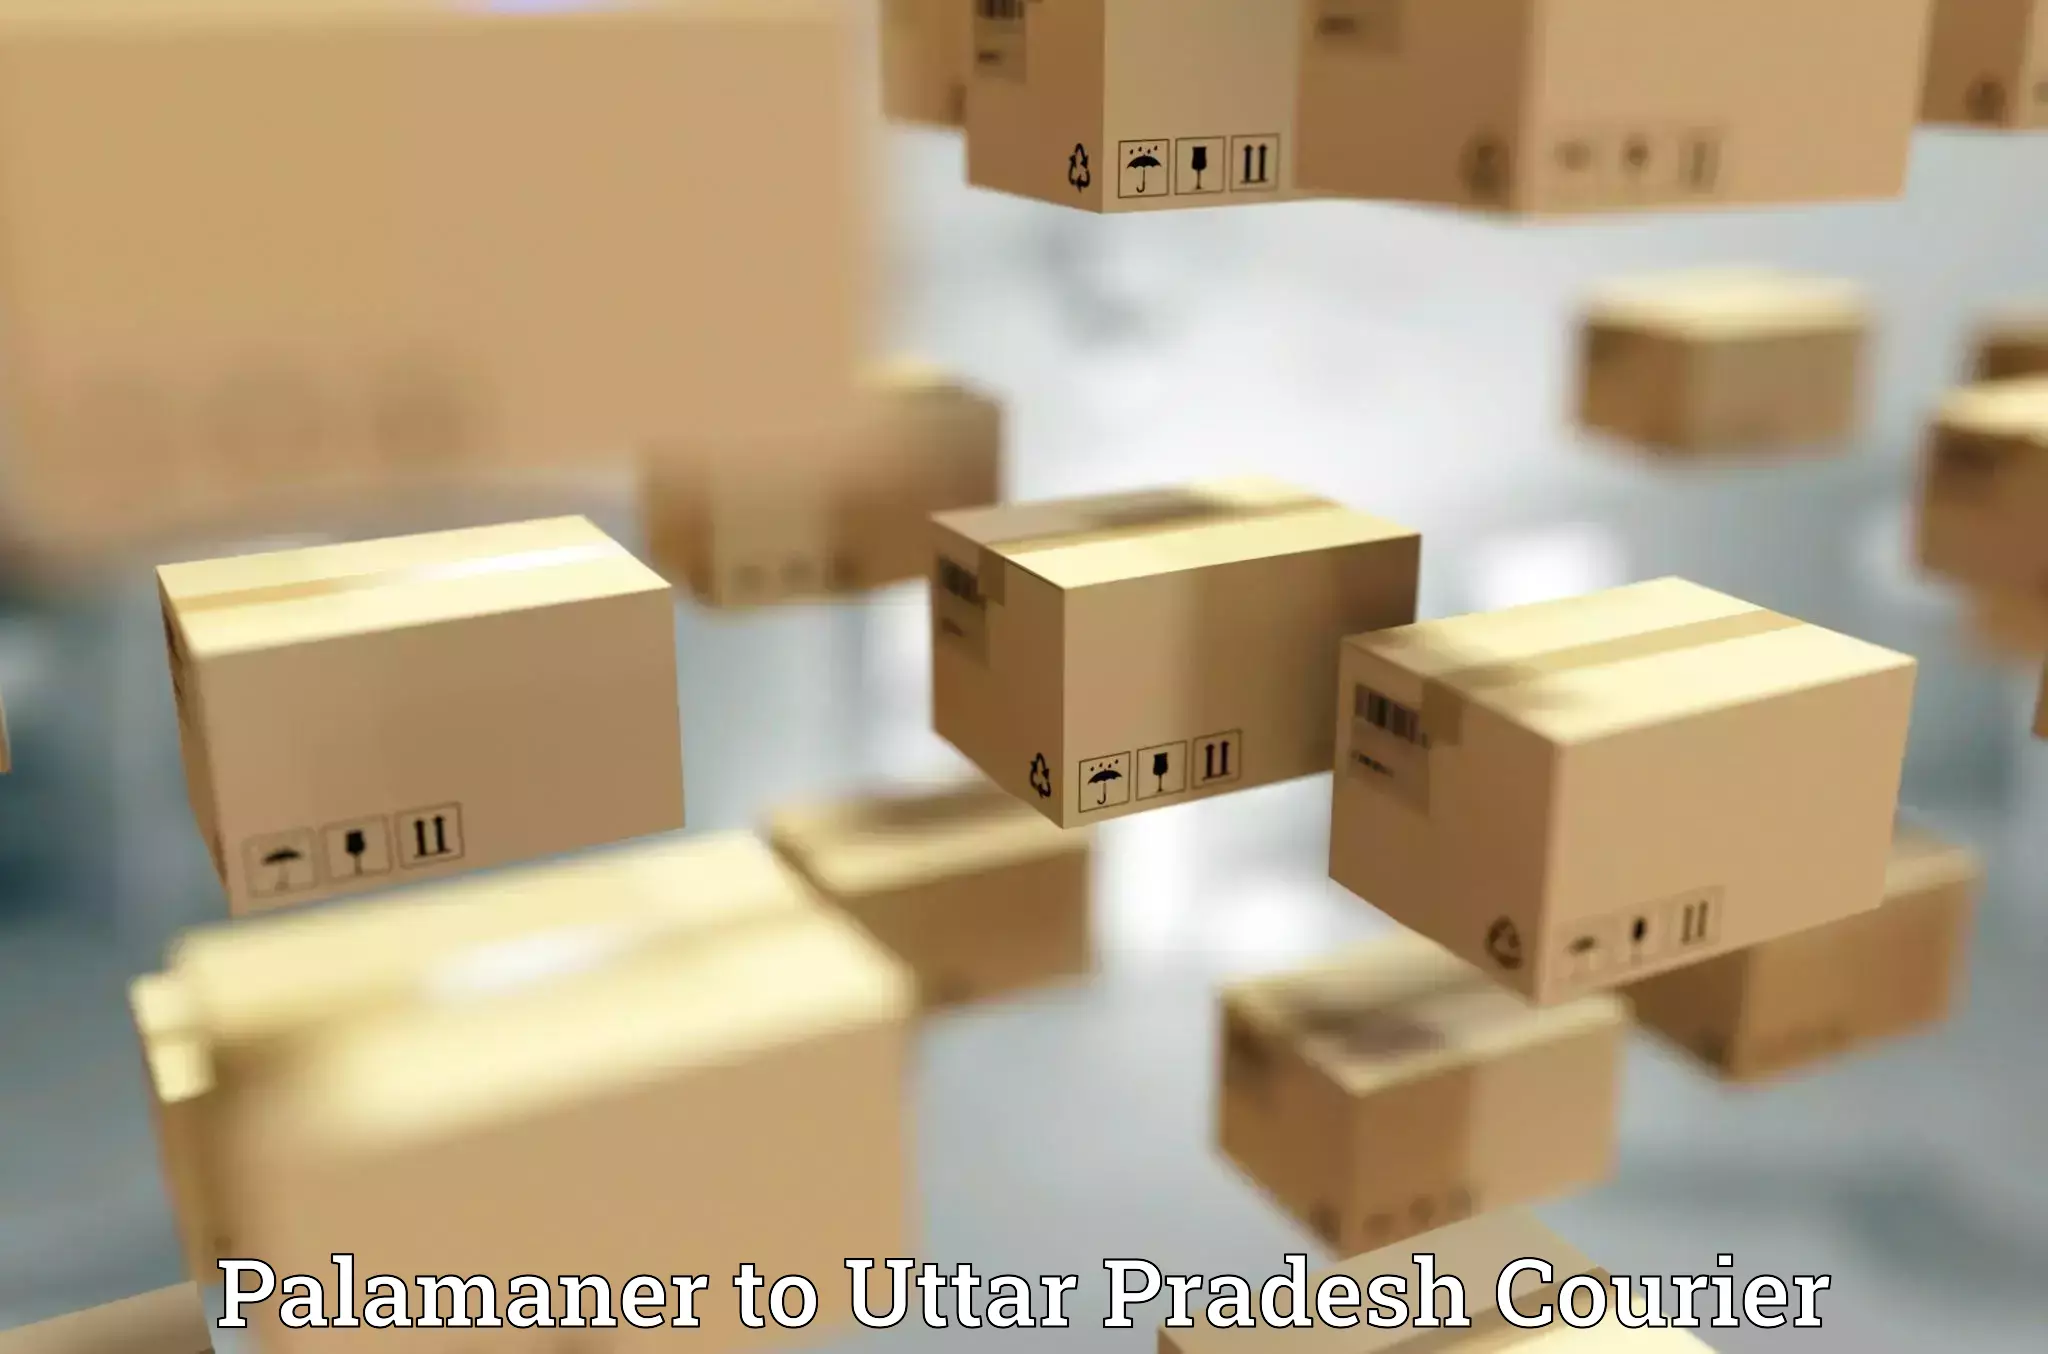 Reliable delivery network Palamaner to Sultanpur Avadh